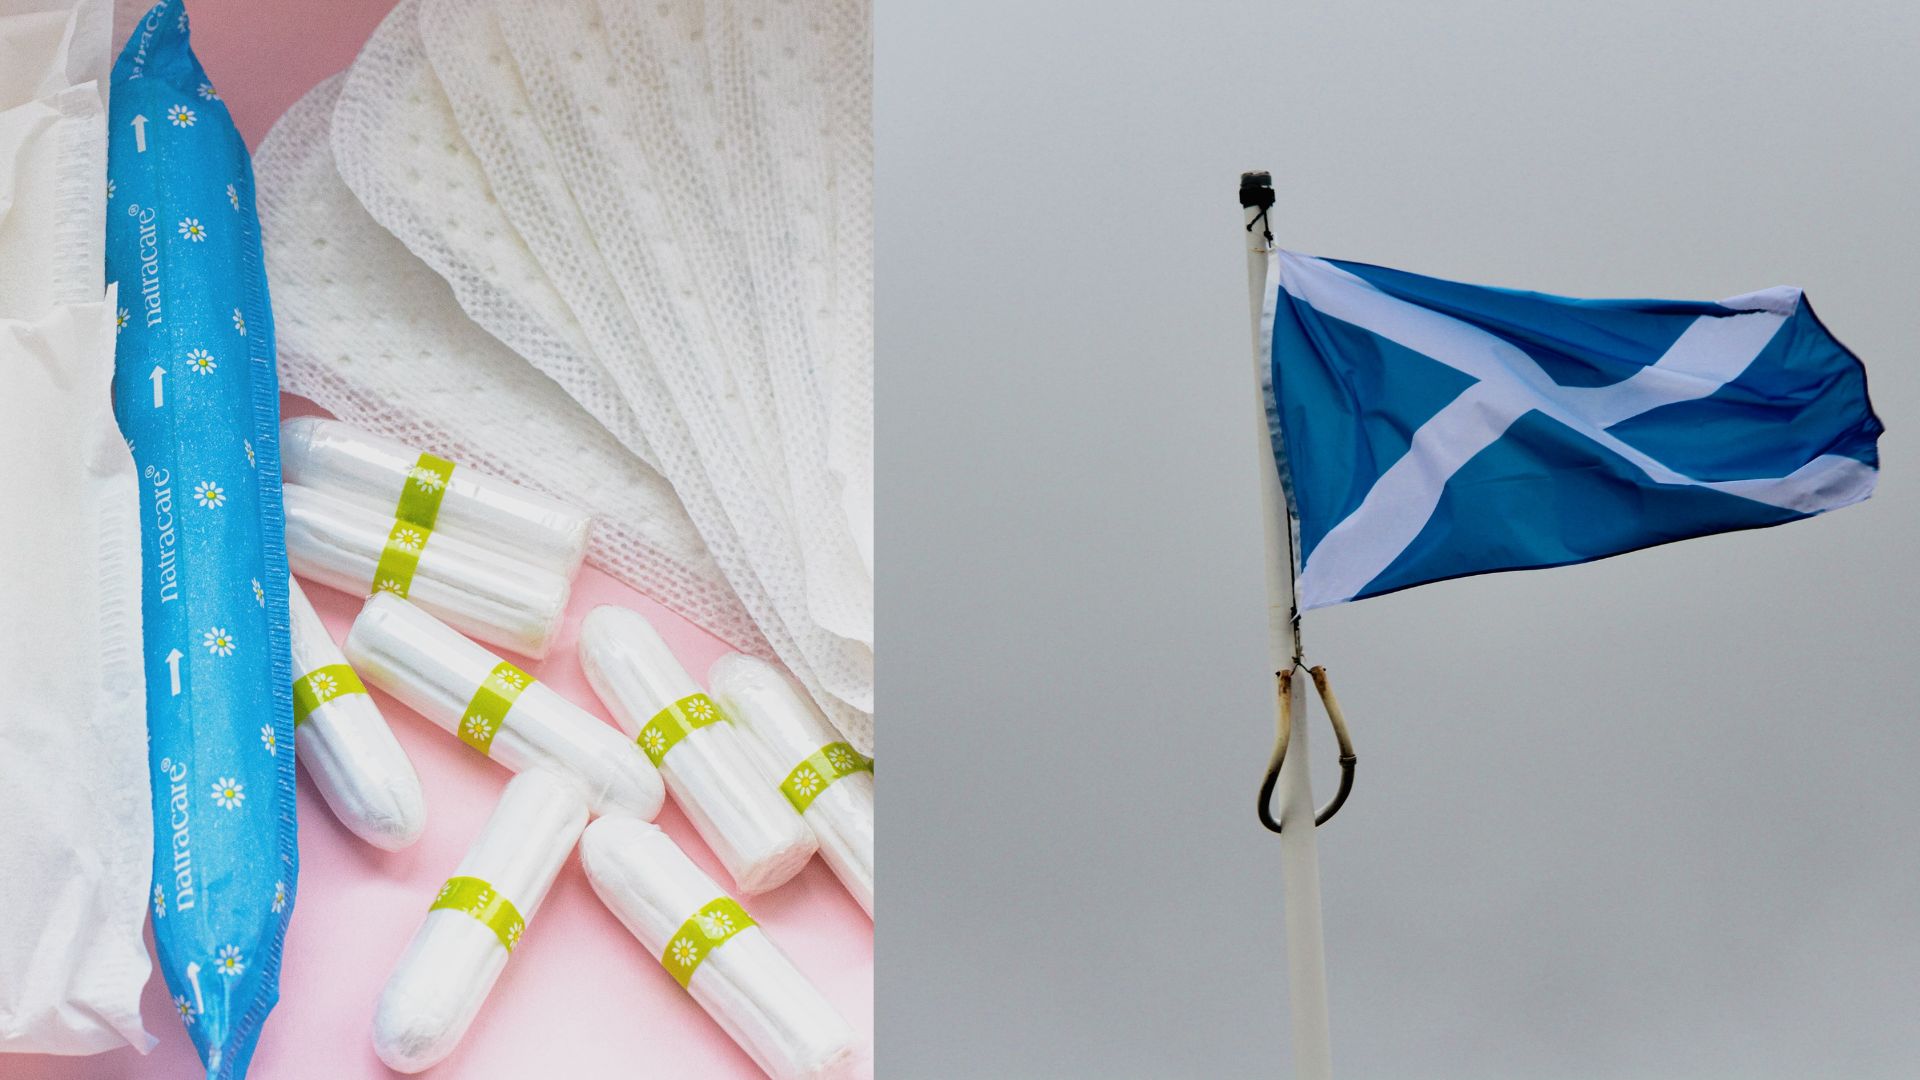 Free Period Products For All In Scotland To End Period Poverty 